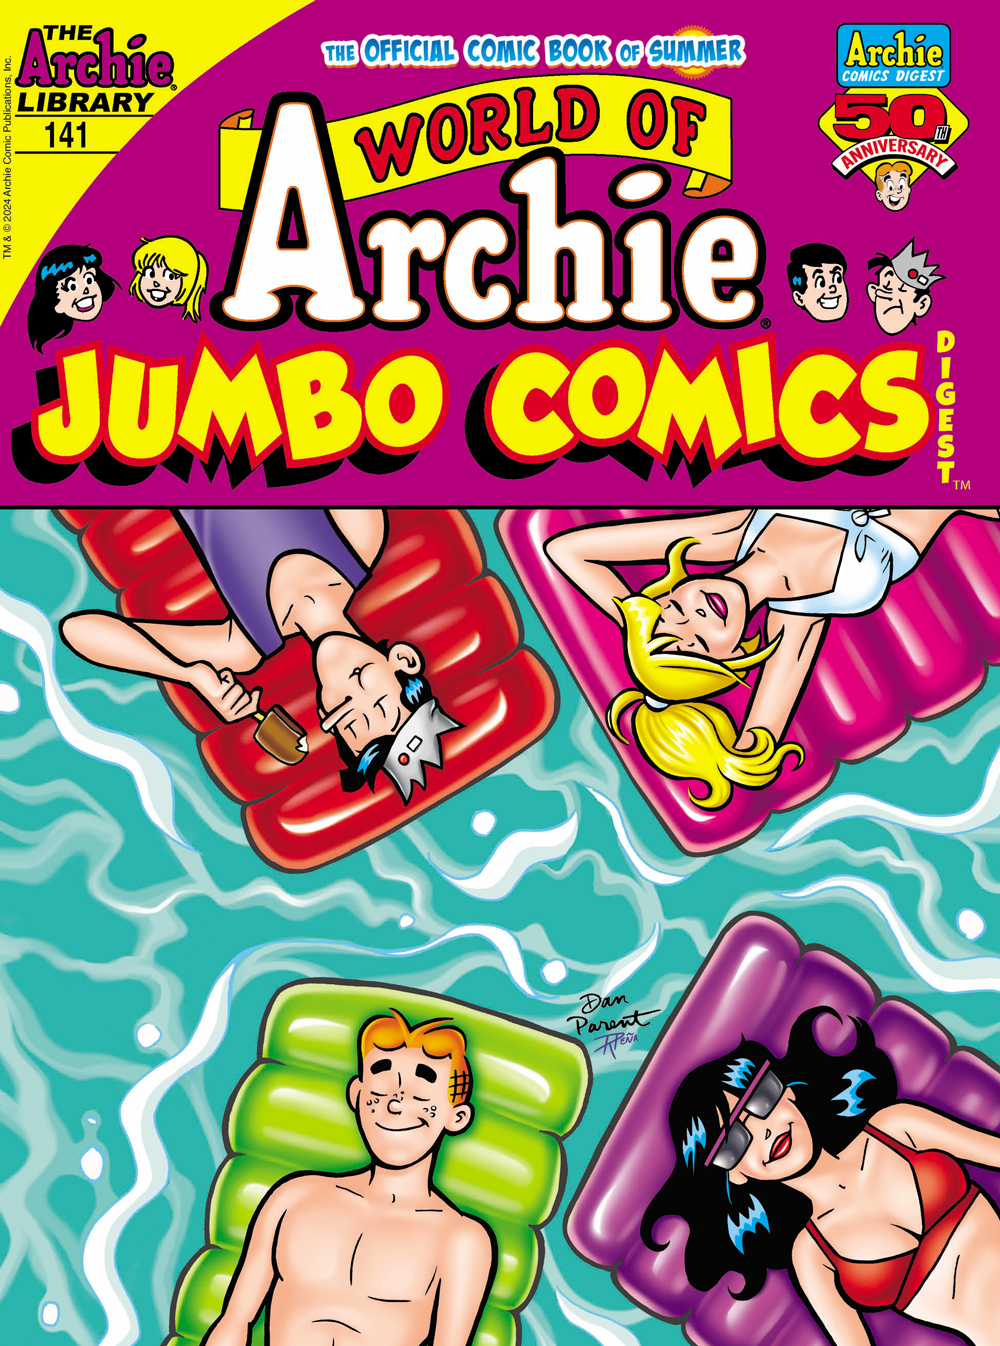 Jughead, Betty, Veronica, and Archie all lay on inflatable beds floating on a pool with their eyes closed, facing up at the reader. Jughead eats an ice cream bar.